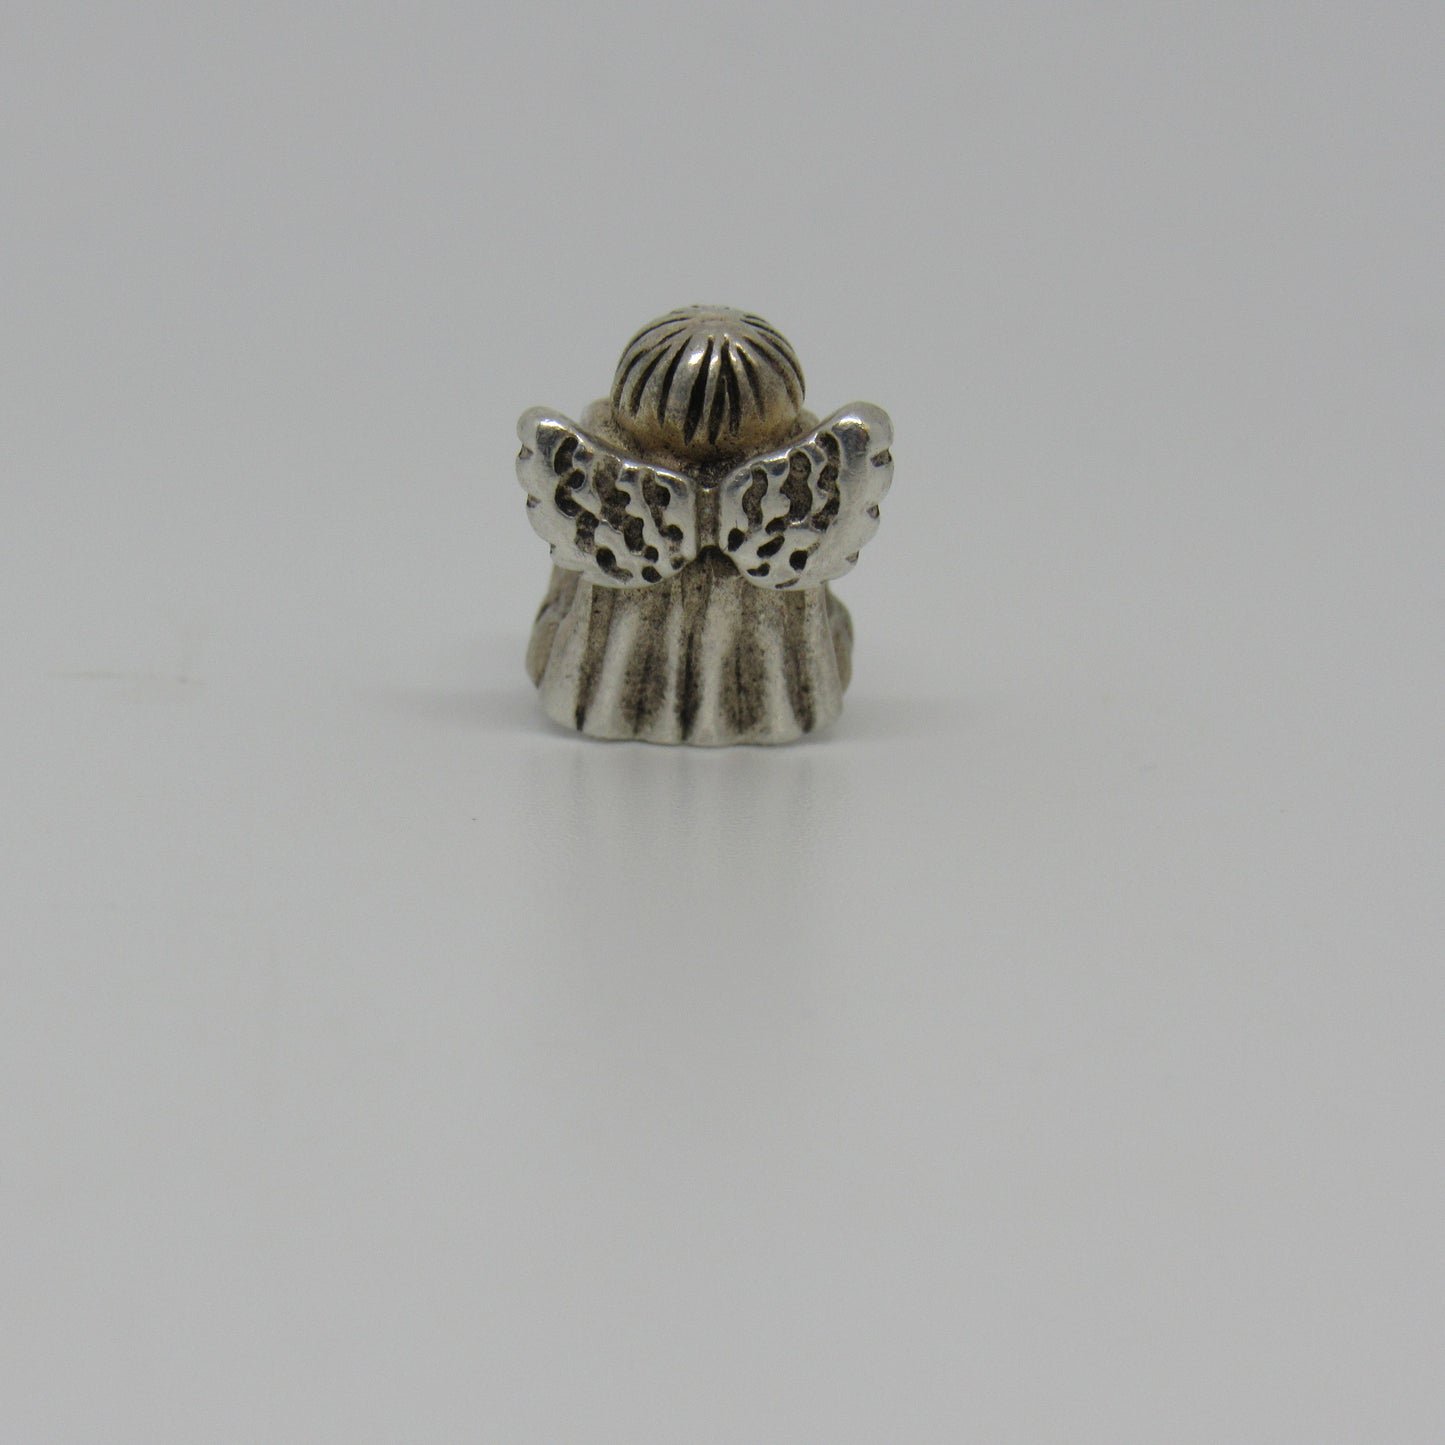 Pandora Moments Angel of Hope Charm Bead Sterling Silver 925 ALE - #790337